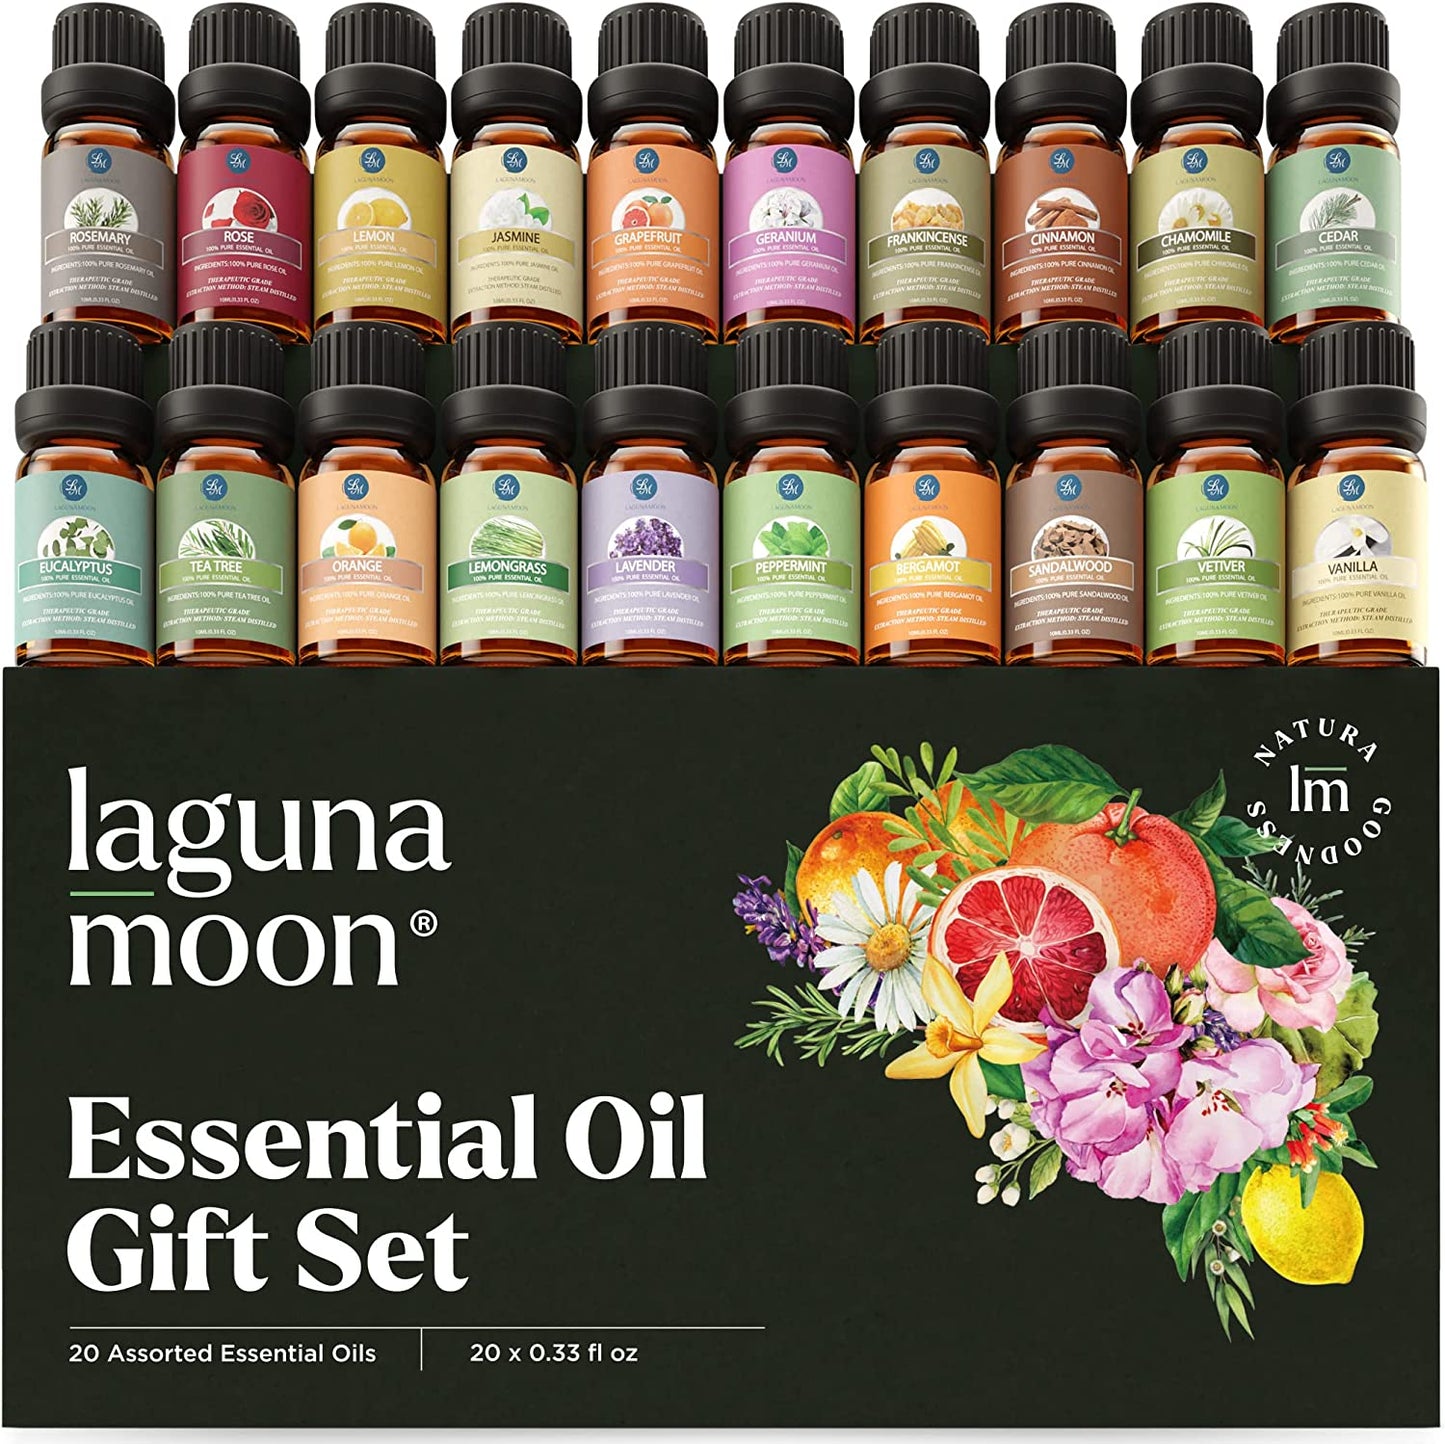 Essential Oils Set - Top 20 Organic Gift Set Oils for Diffusers, Humidifiers, Massages, Aromatherapy, Candle Making, Skin & Hair Care - Peppermint, Tea Tree, Lavender, Eucalyptus, Lemongrass (10Ml)